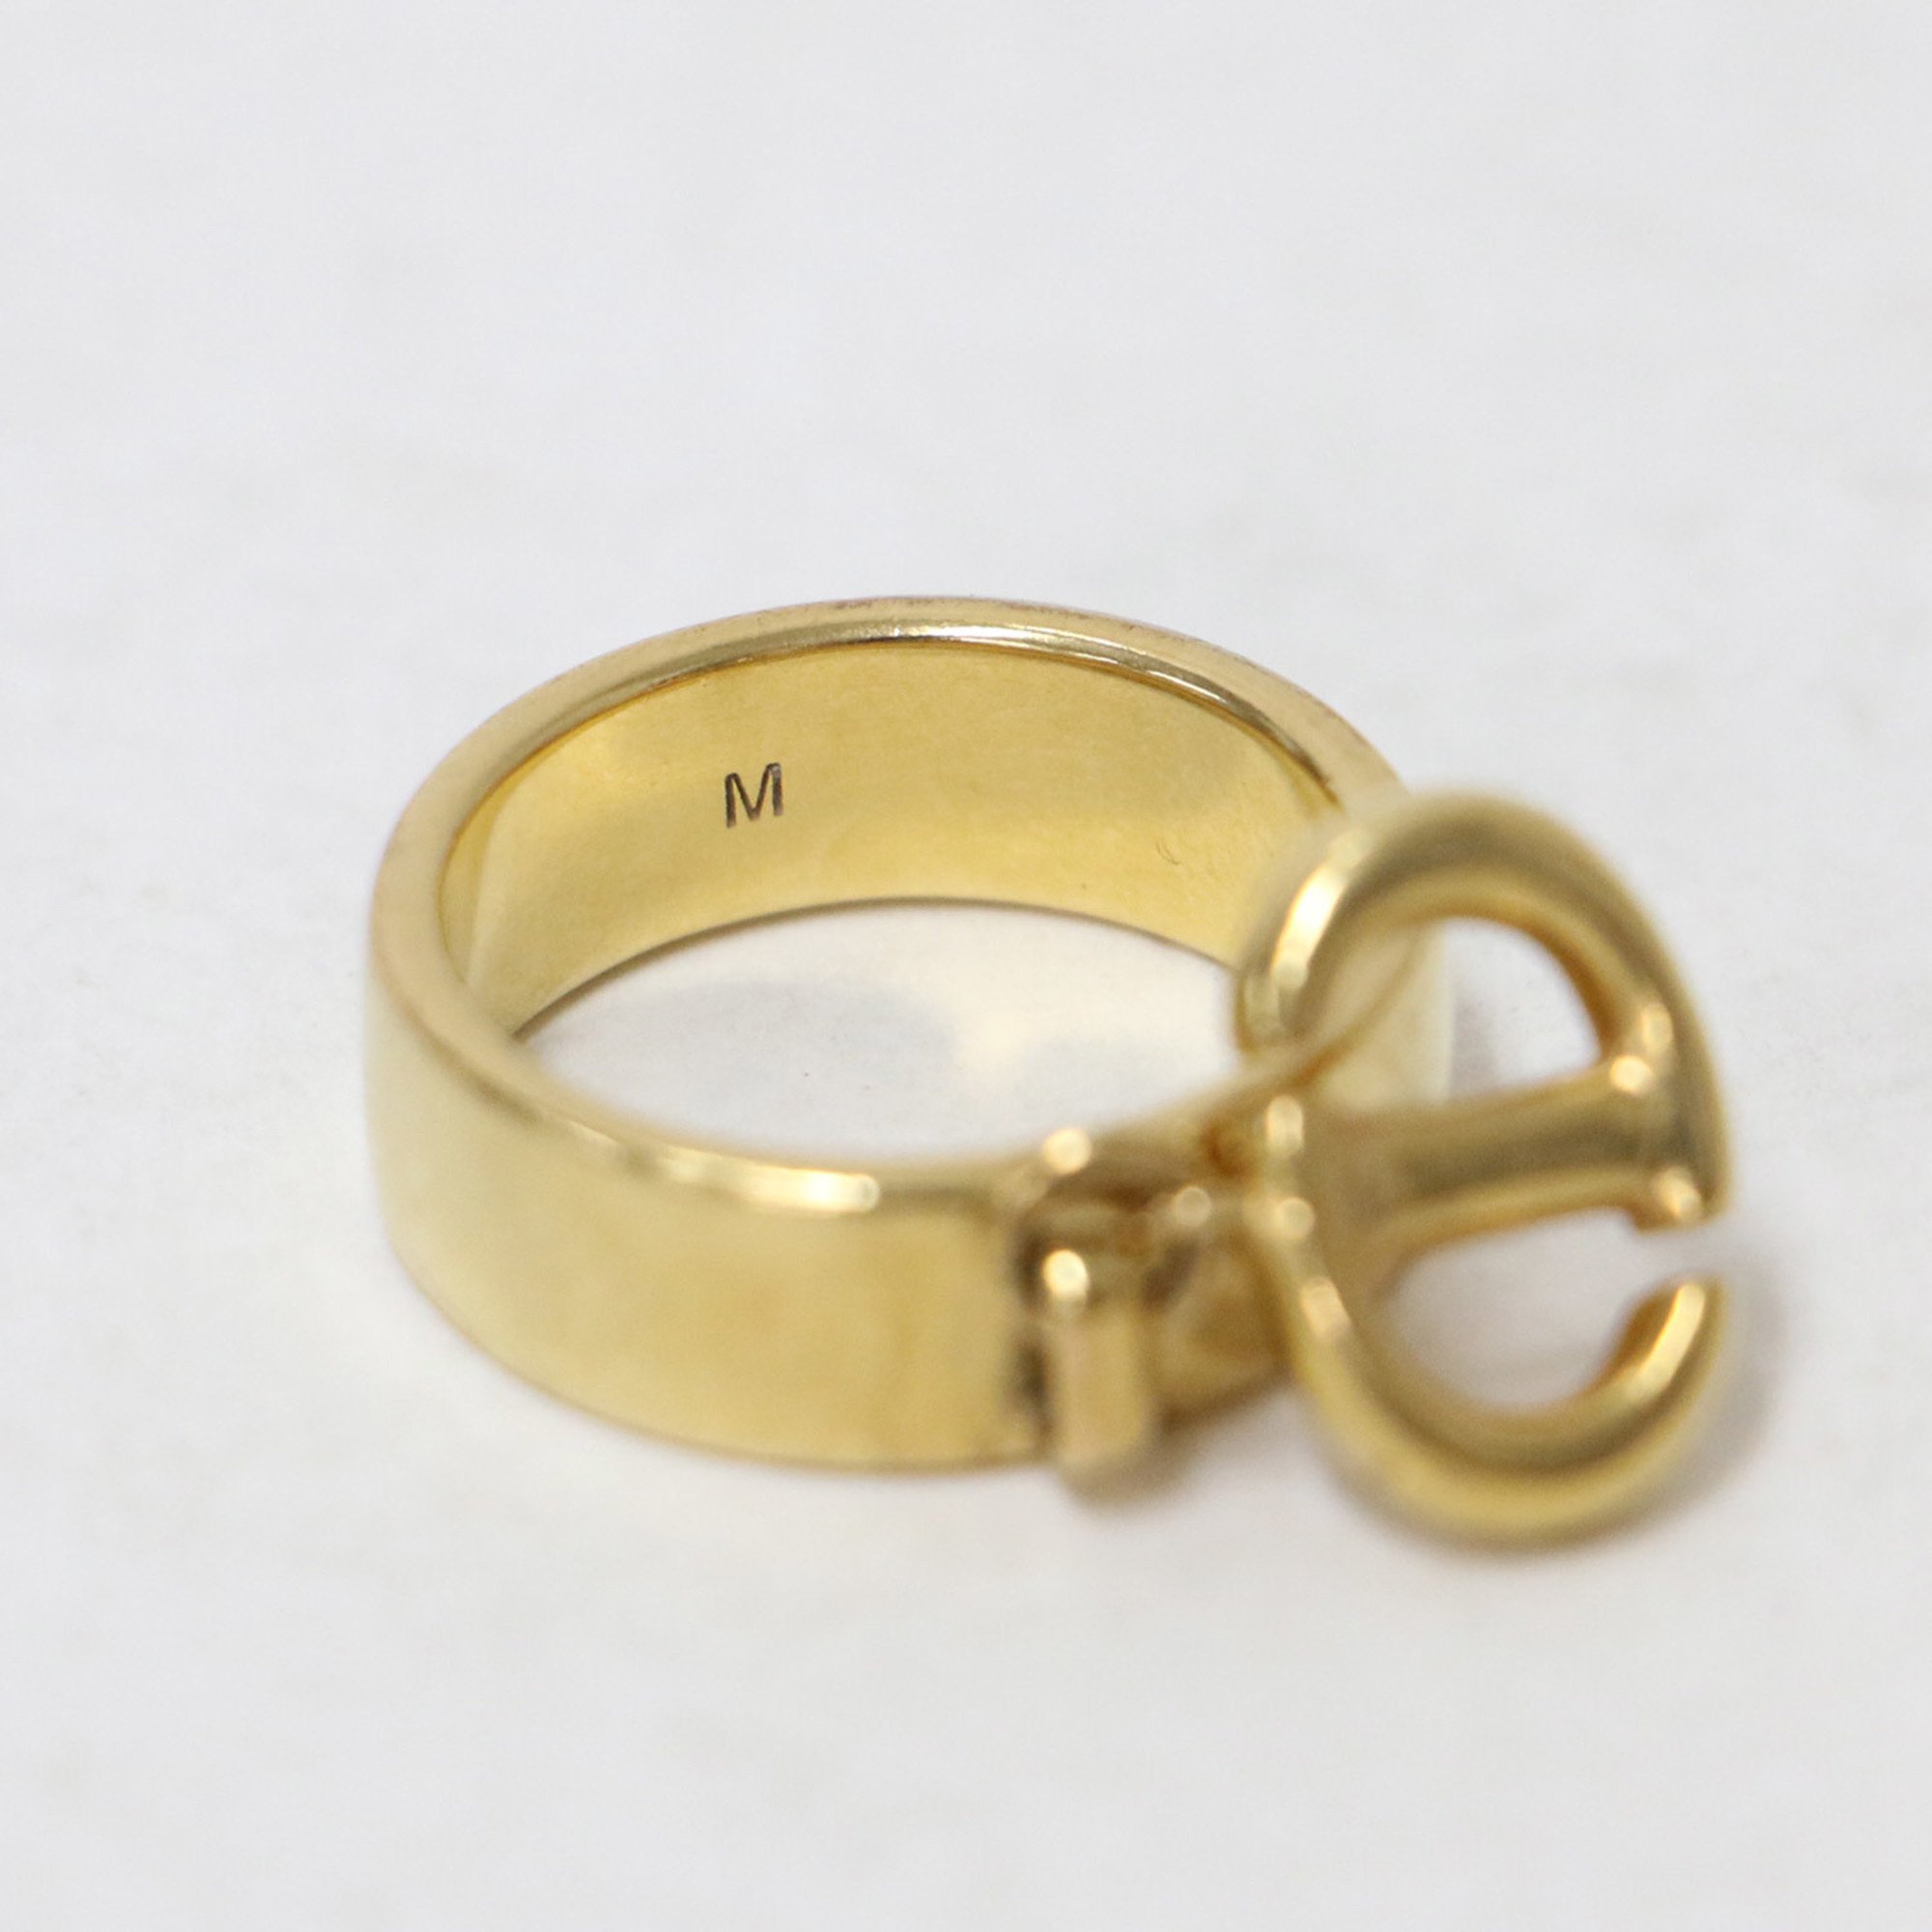 Christian Dior Ring Size: M (11-12) Charm CD NAVY Gold Luxury